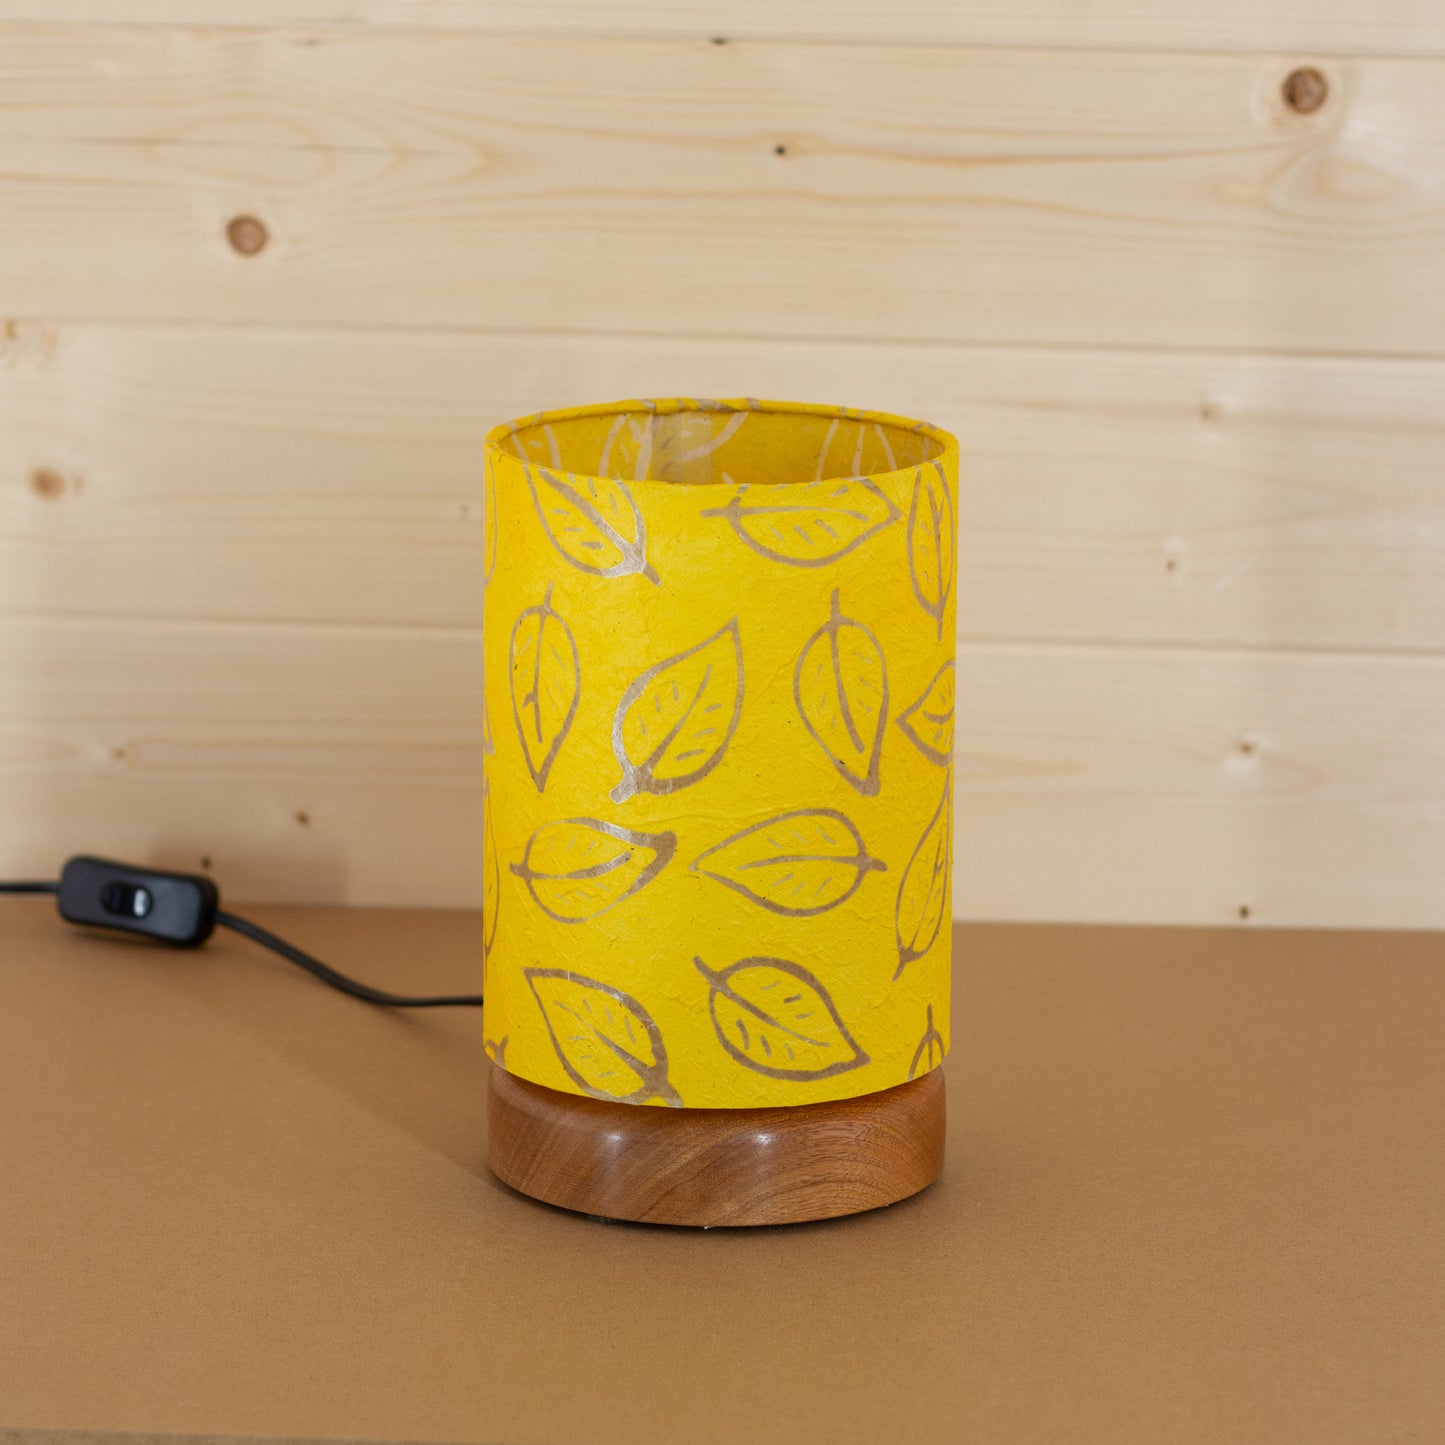 Flat Round Sapele Table Lamp with 15cm x 20cm Lampshade in B107 ~ Batik Leaf on Yellow